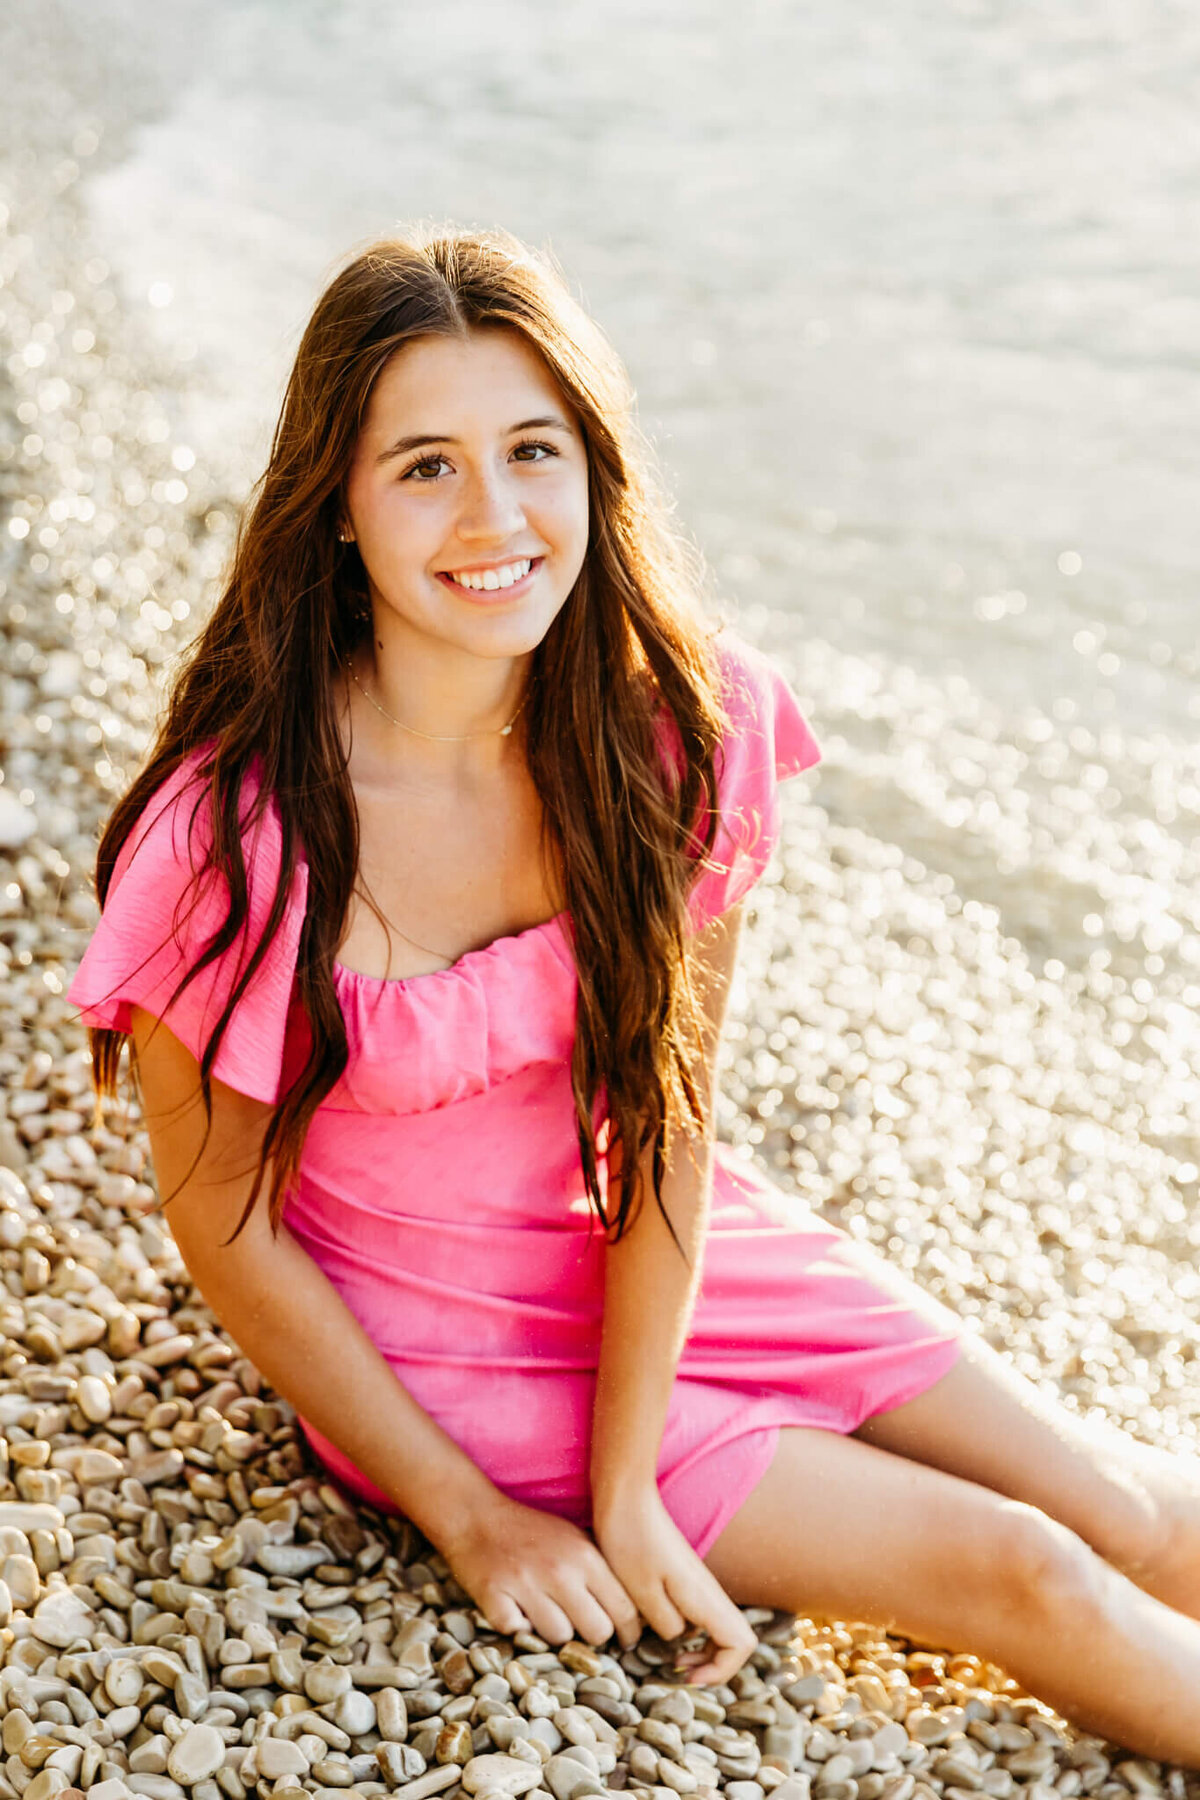 image of a beautiful teen girl sitting on a beach and smiling